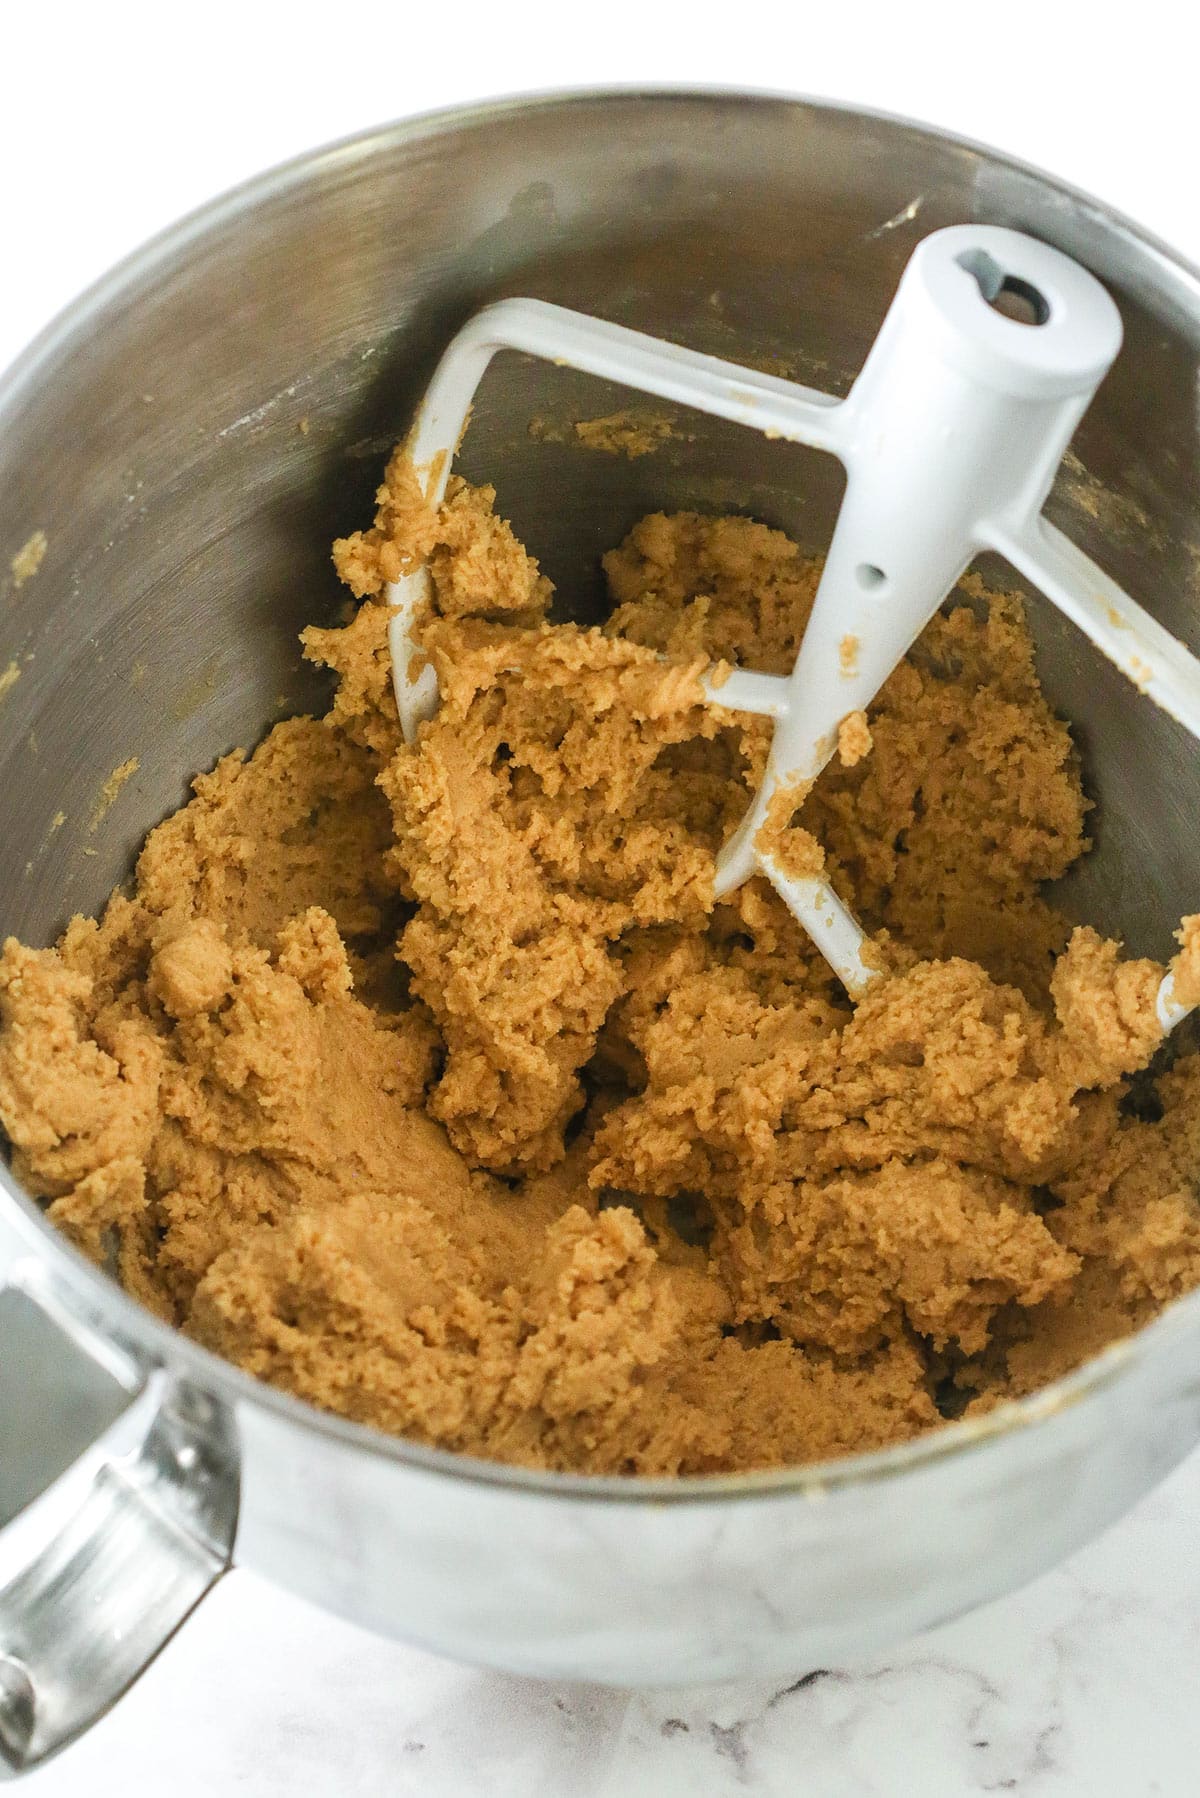 Peanut butter cookie dough in a mixing bowl